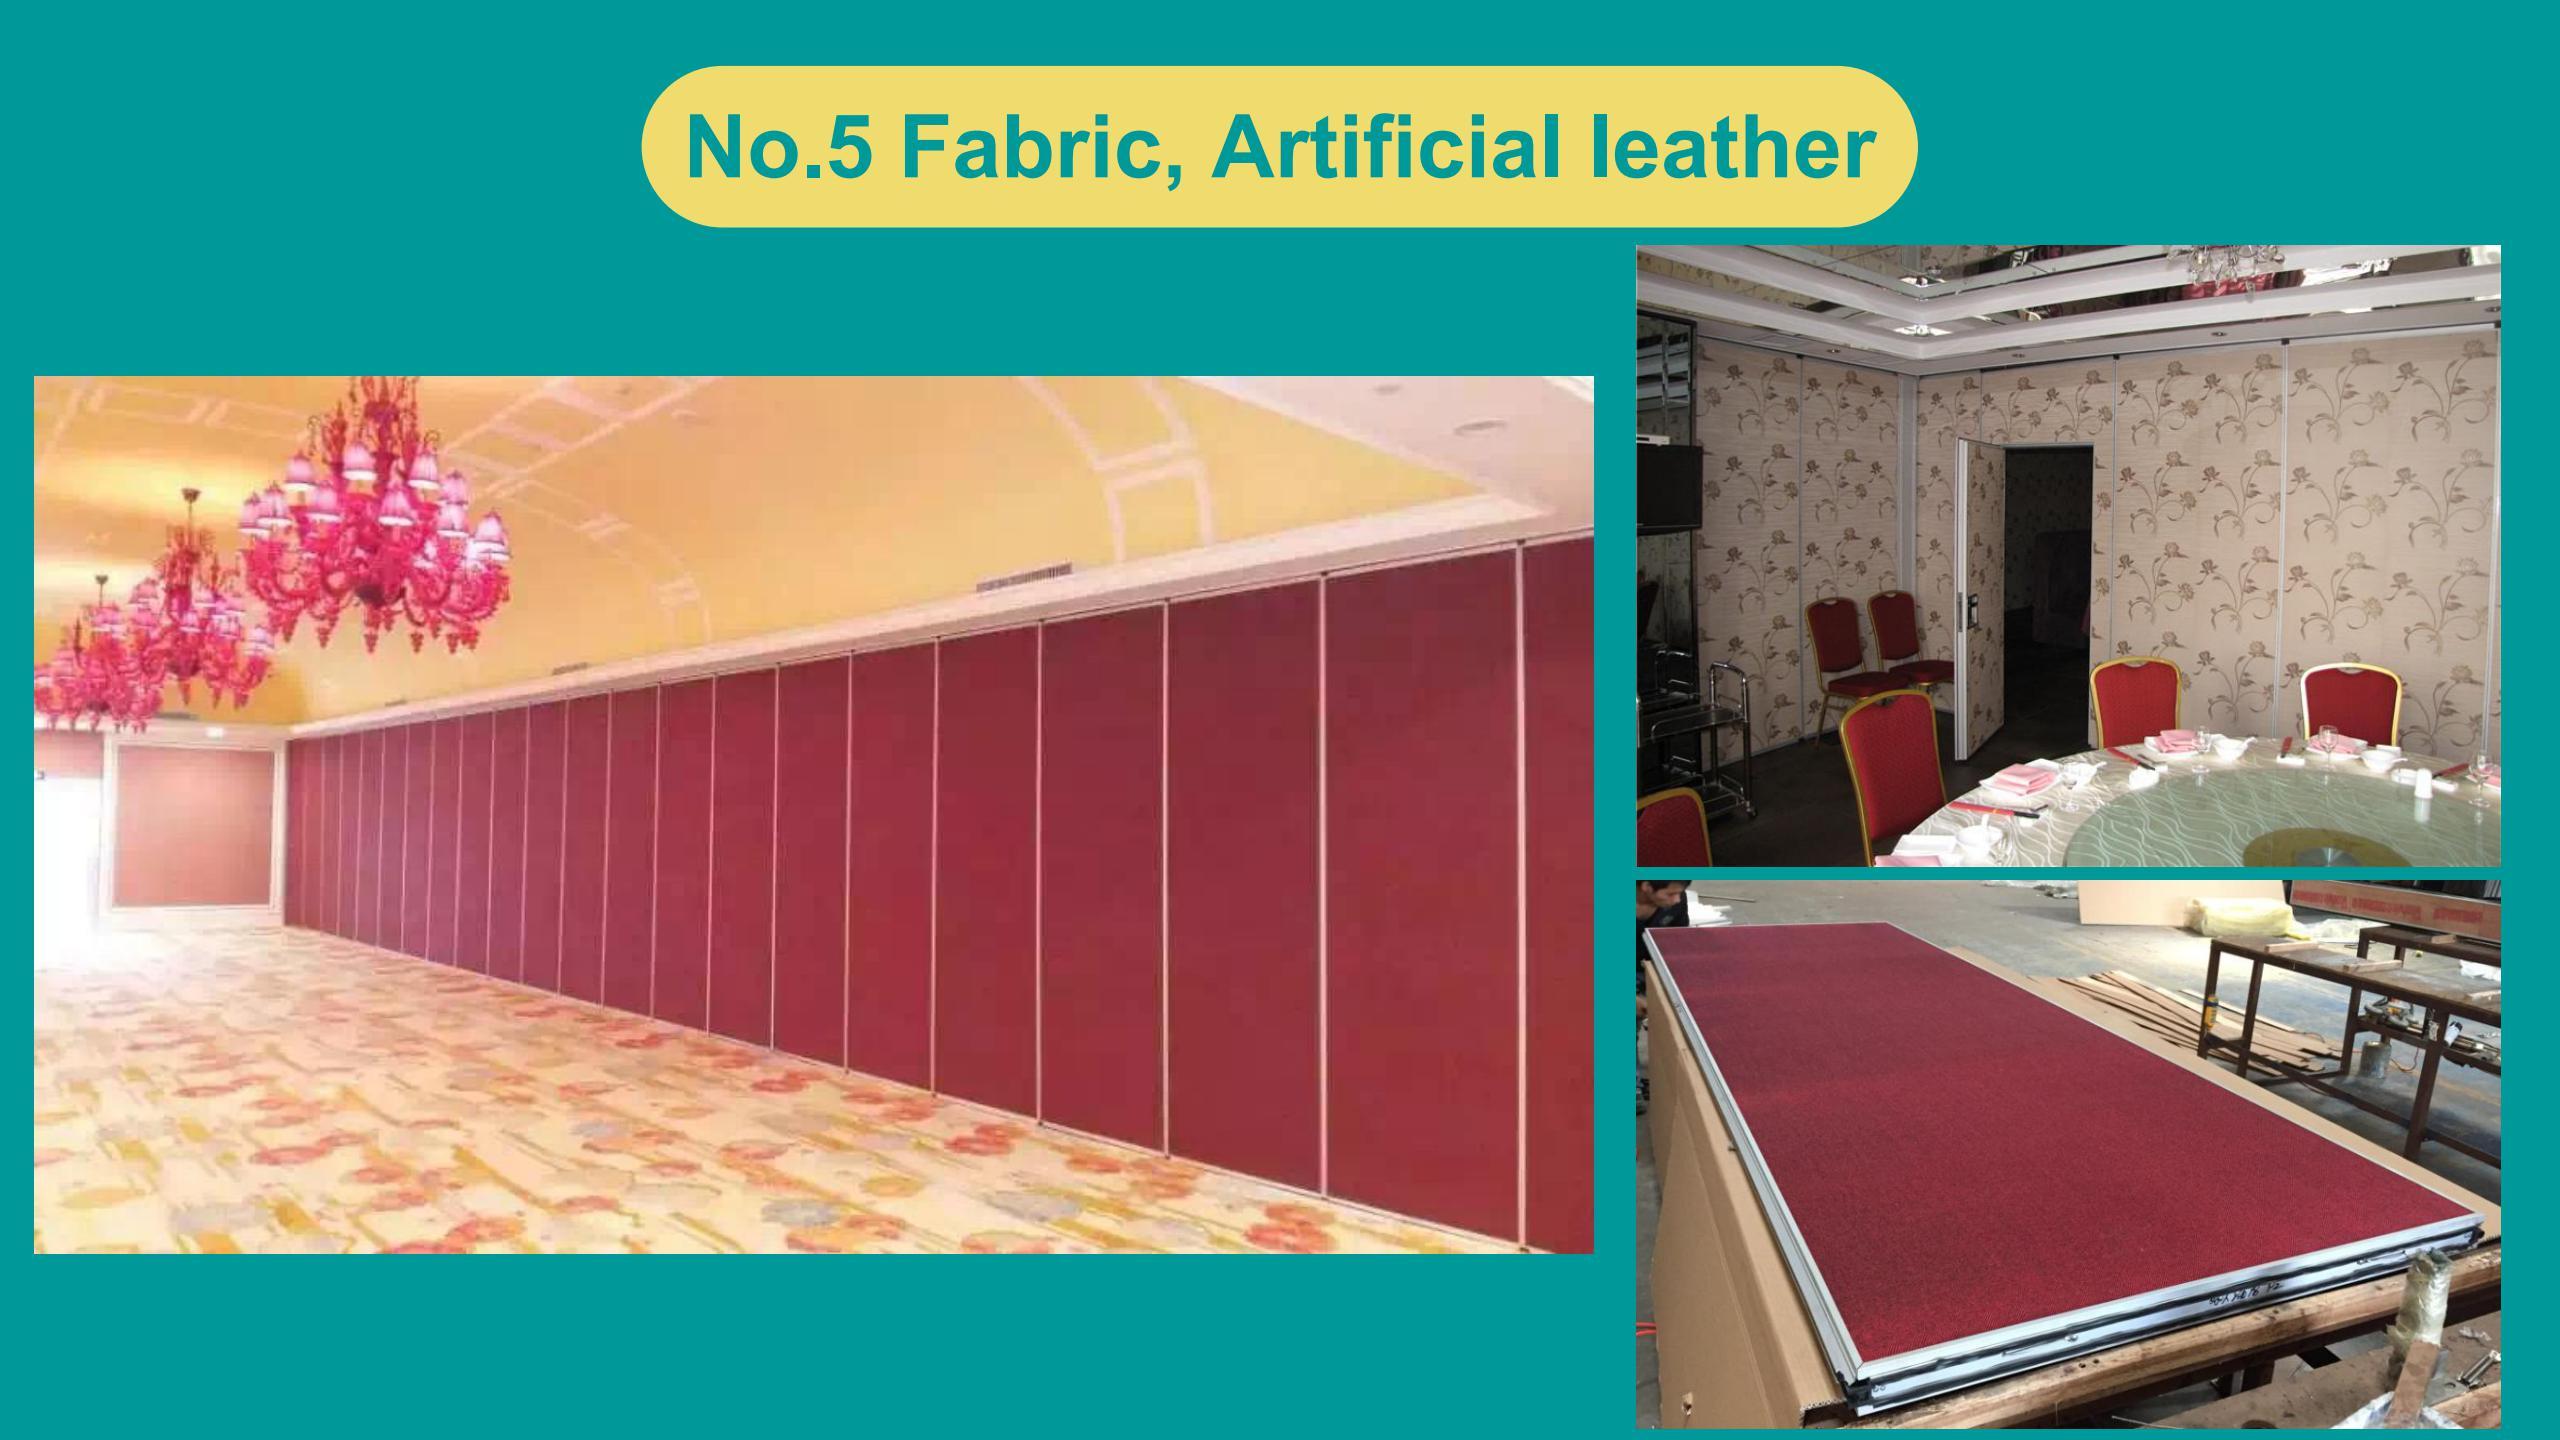 Fabric, Artificial leather